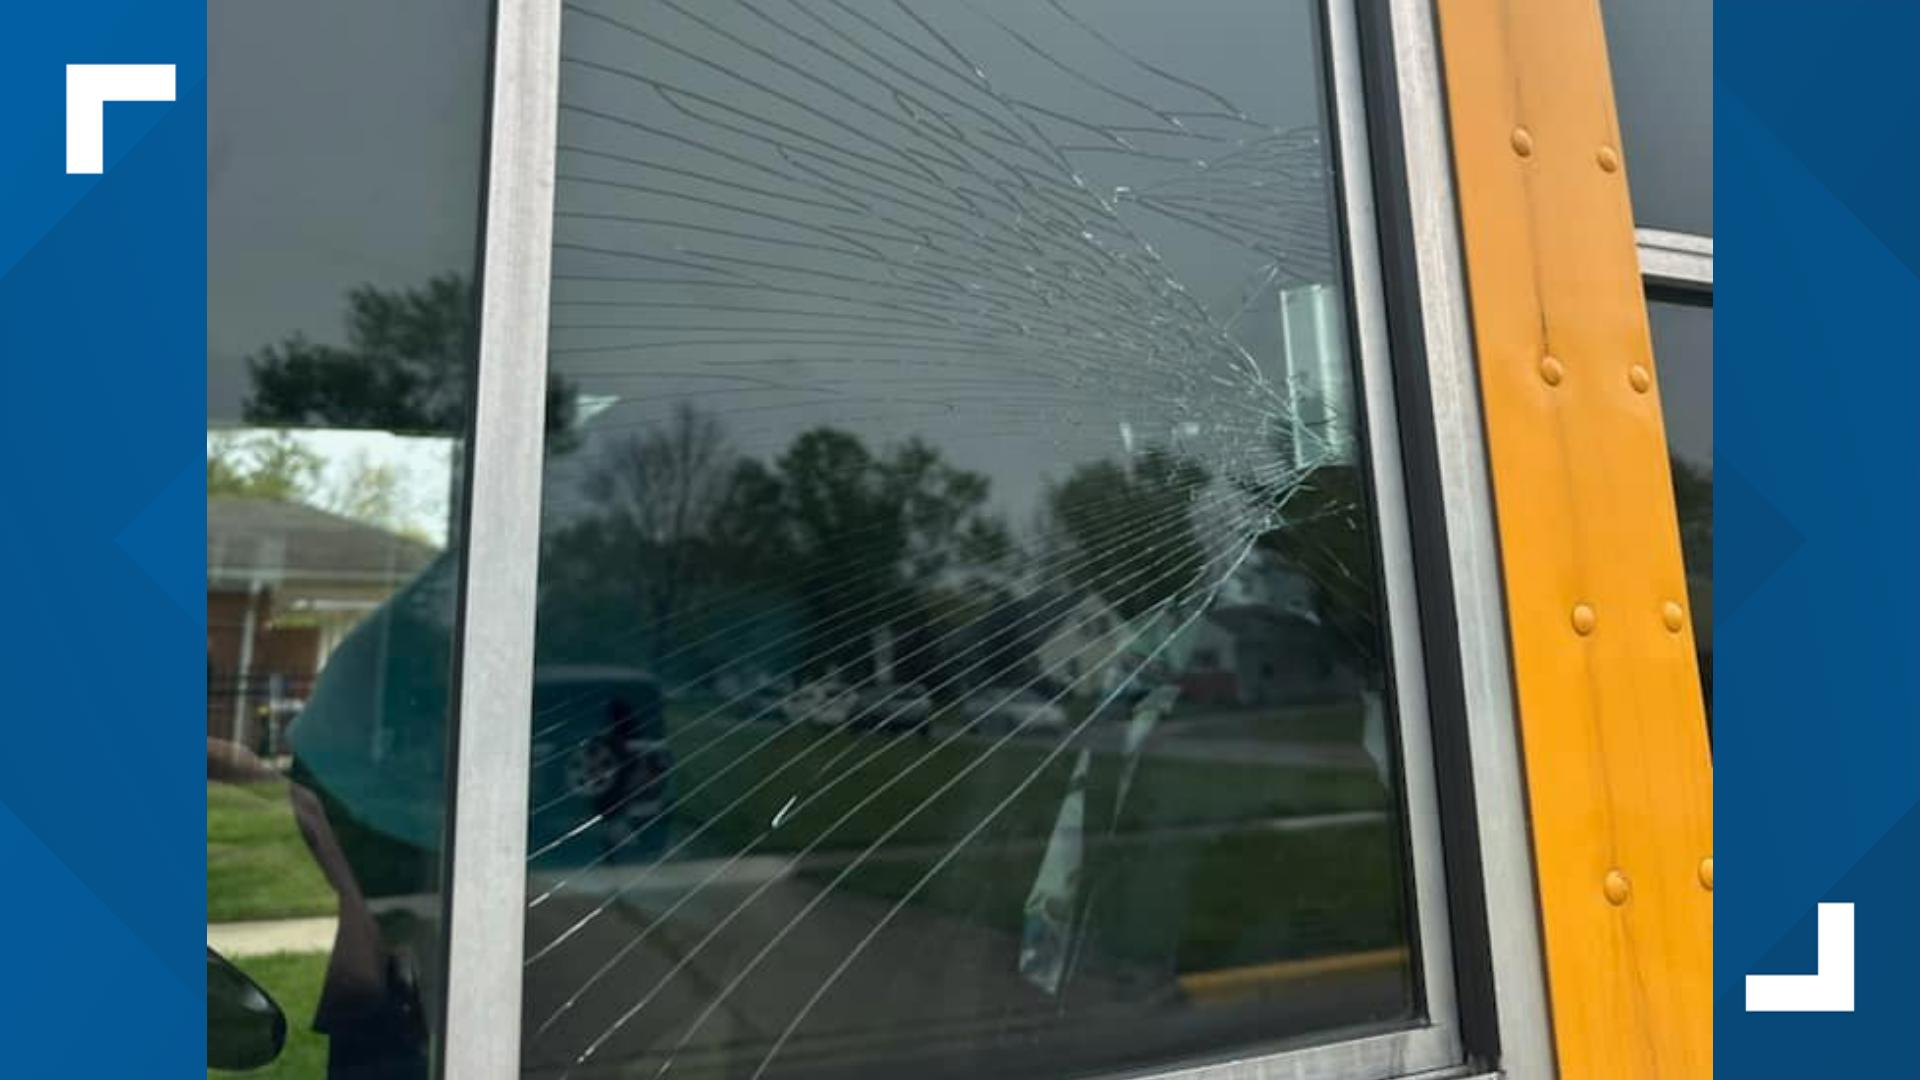 A man is facing charges after he allegedly punched the window of a school bus near west Columbus earlier this week while more than two dozen kids were onboard.